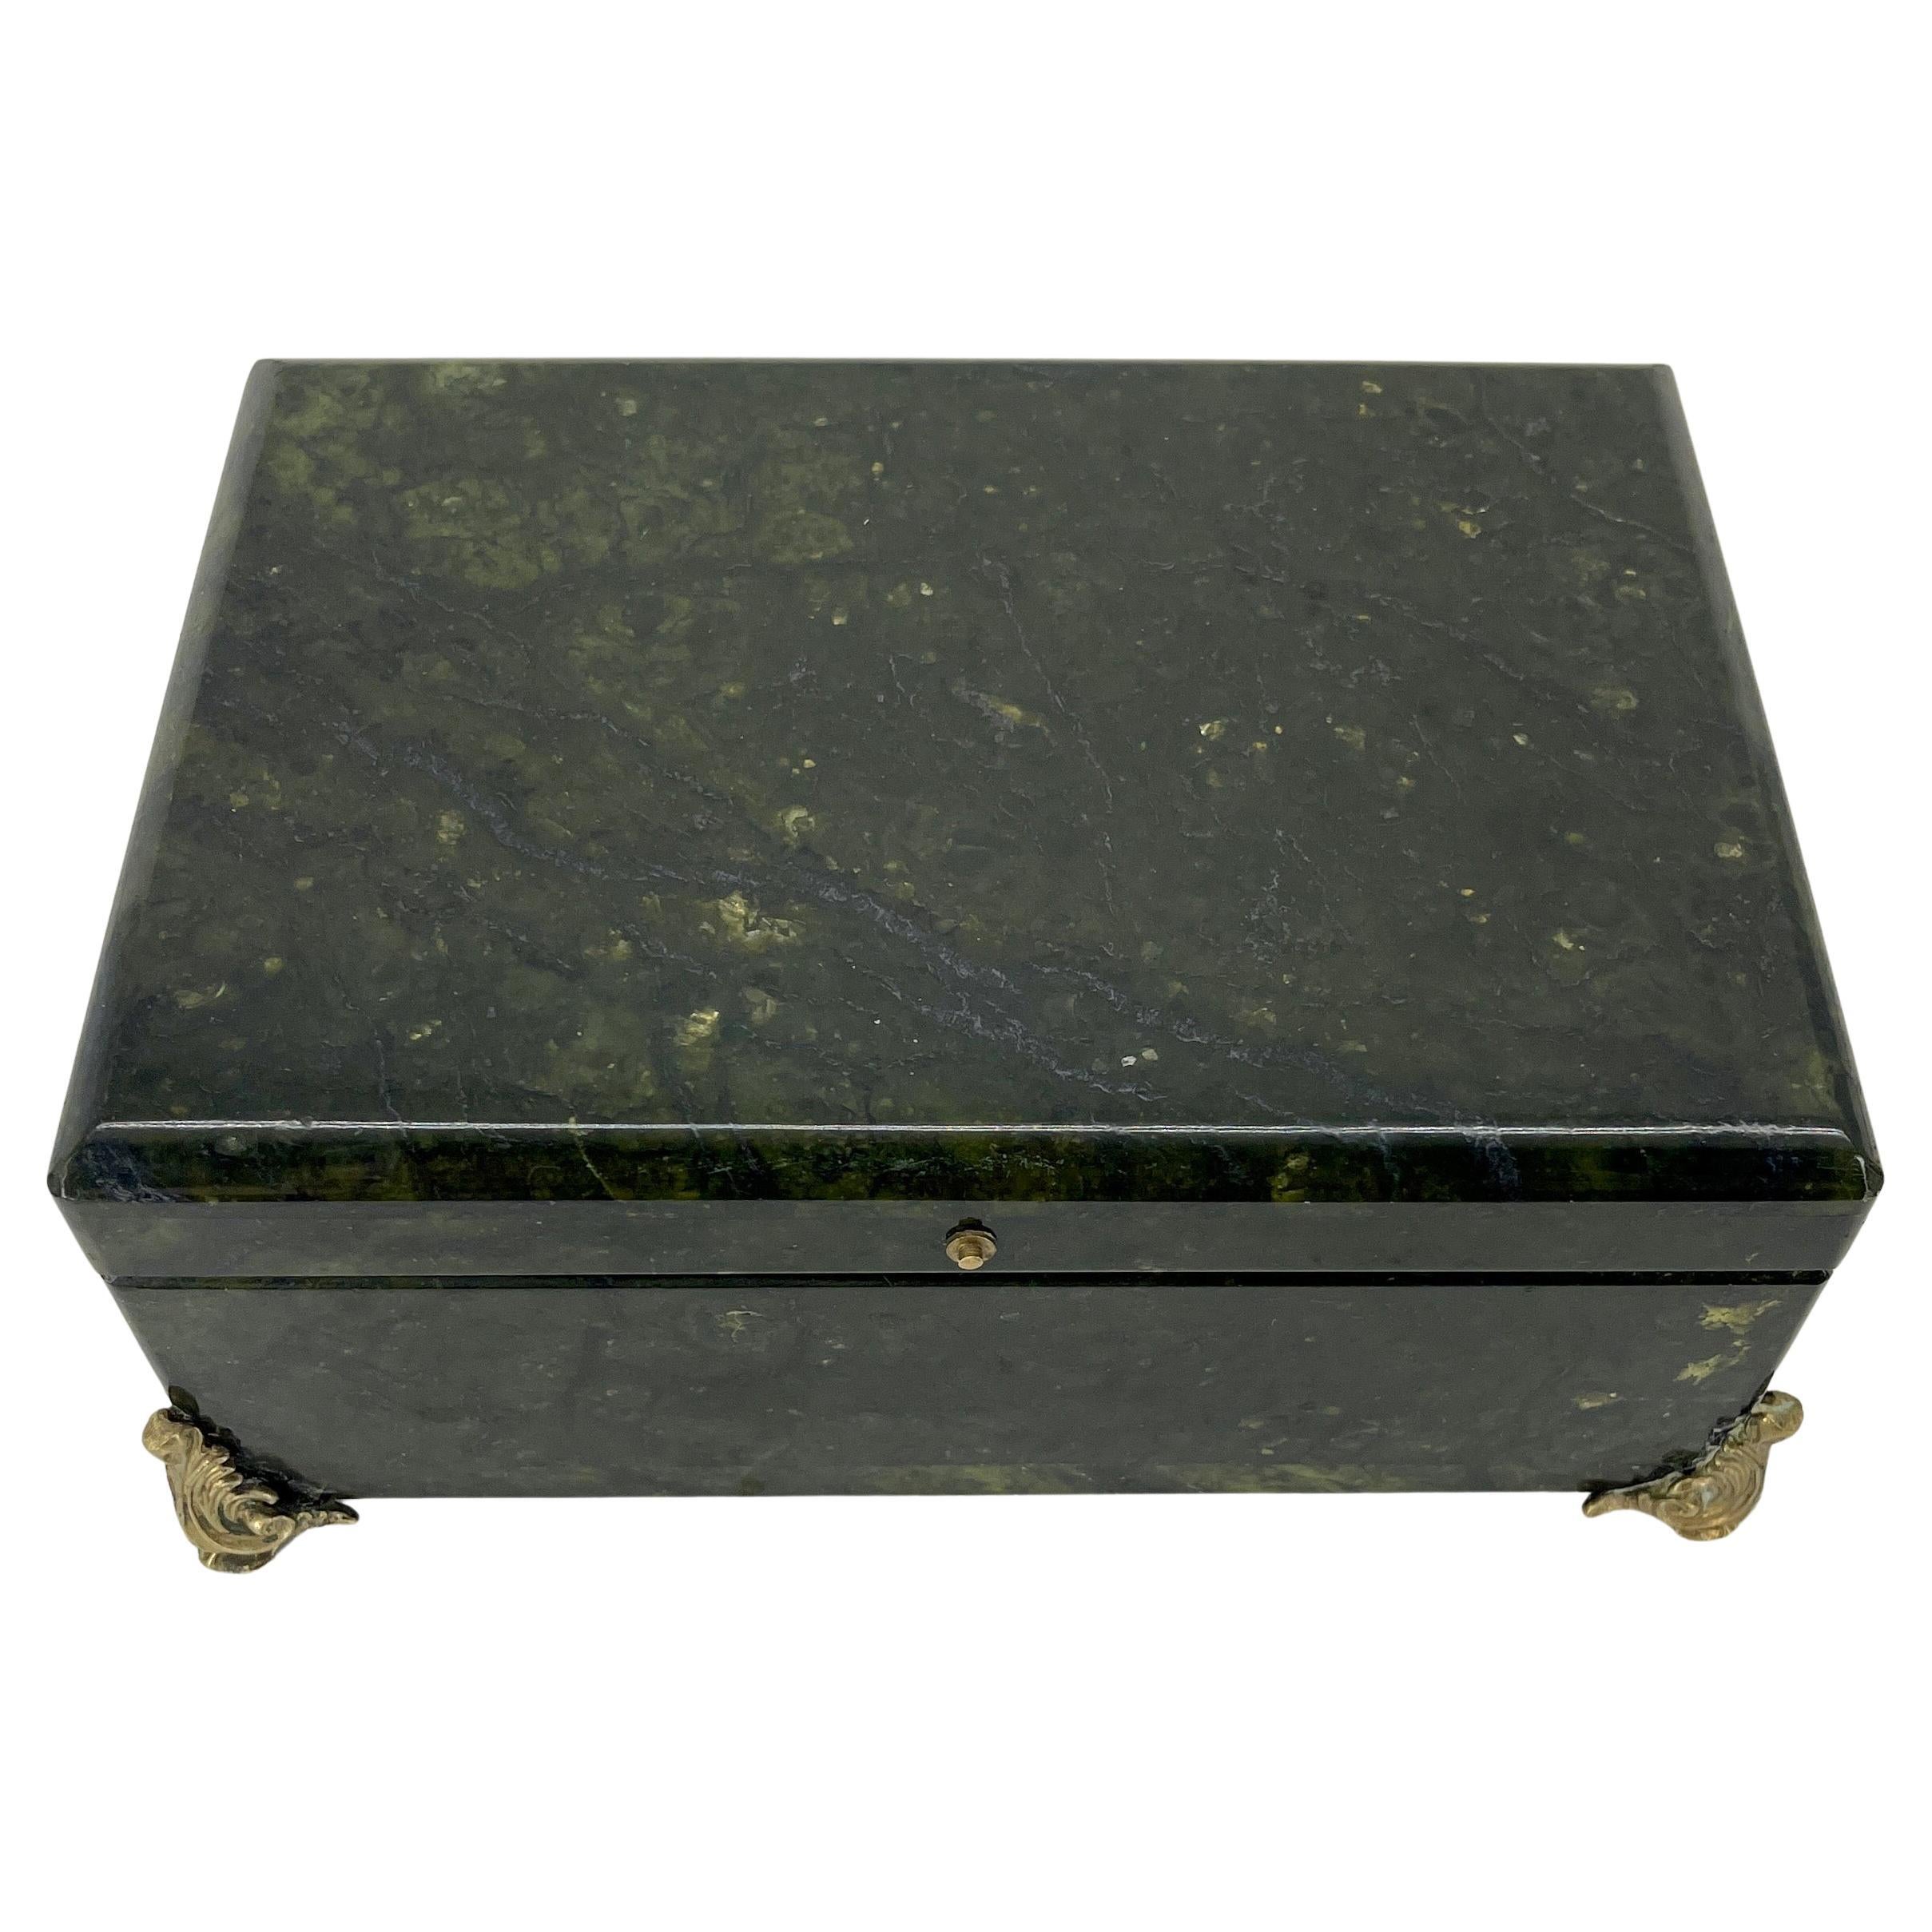 Vintage Deep Forrest Green Marble Jewelry Box on Bronze Feet, Italy.
This rectangular box has vintage blue velvet interior and the original bronze hardware.

